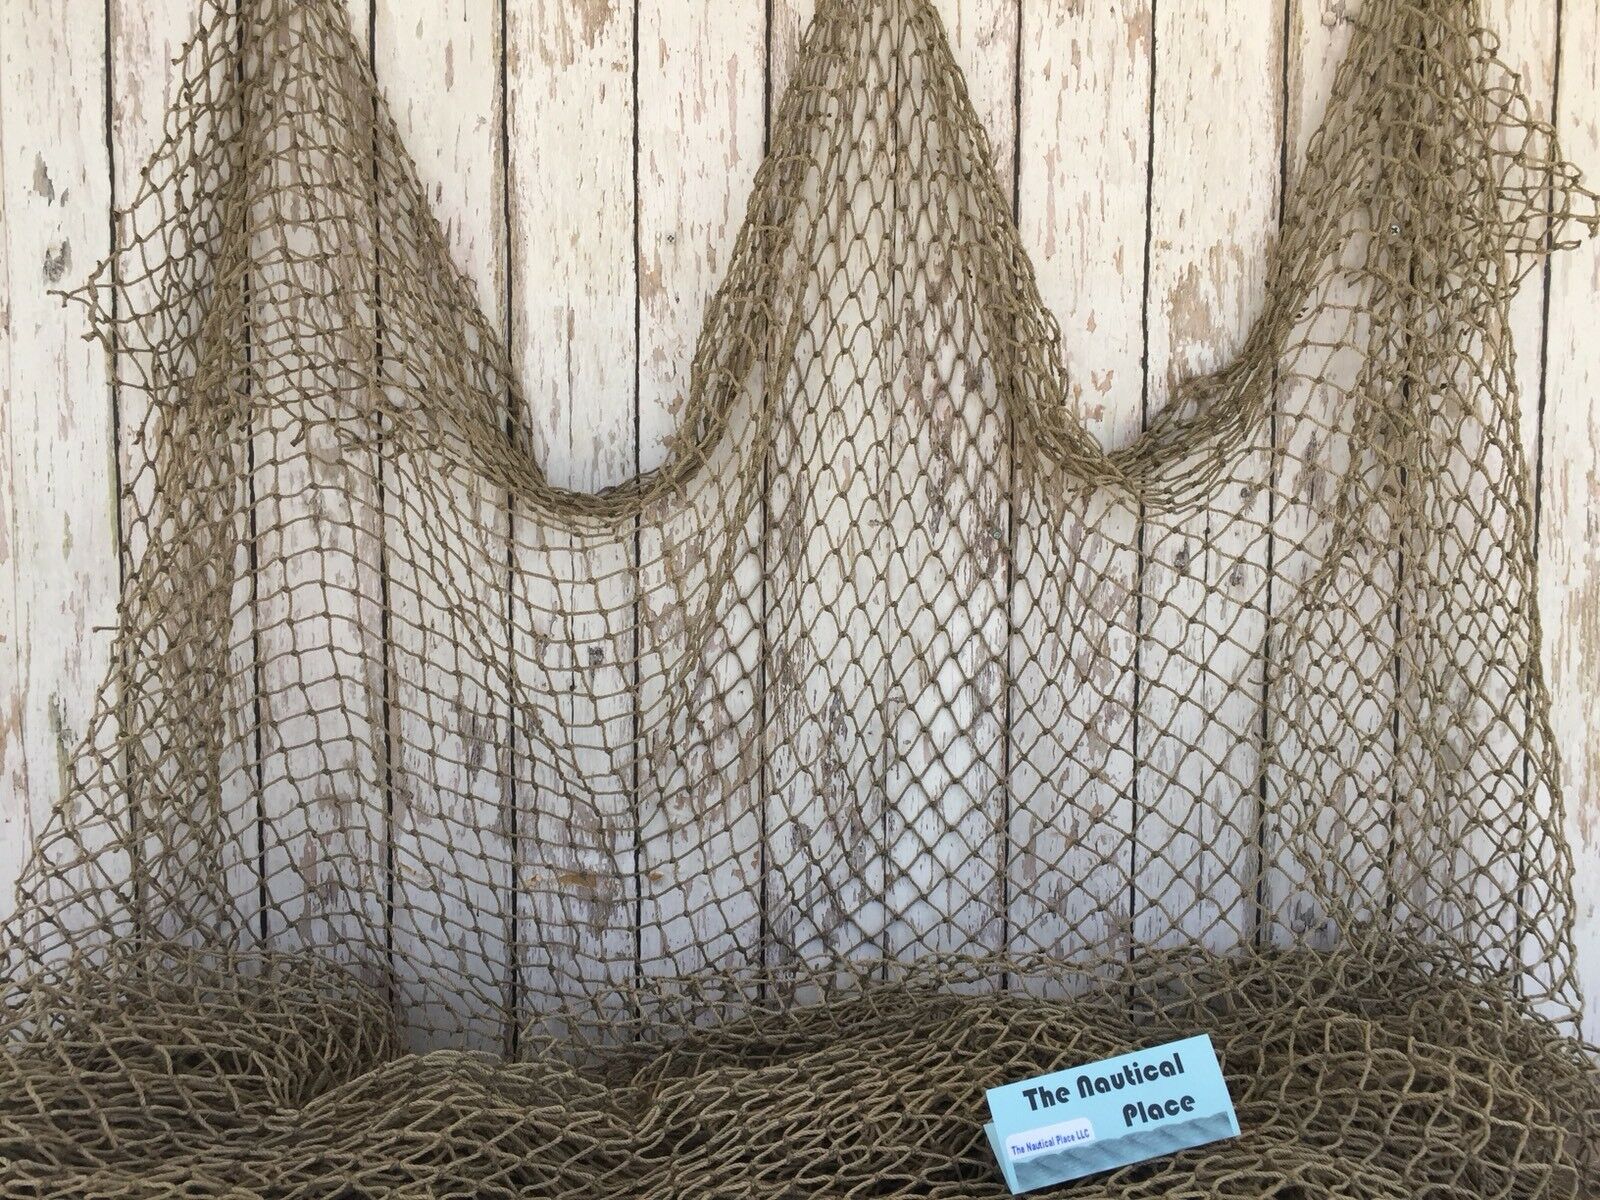 Authentic Used Fish Netting ~ 10' X 10' ~ Golf Ball Net, Batting Cage Backstop